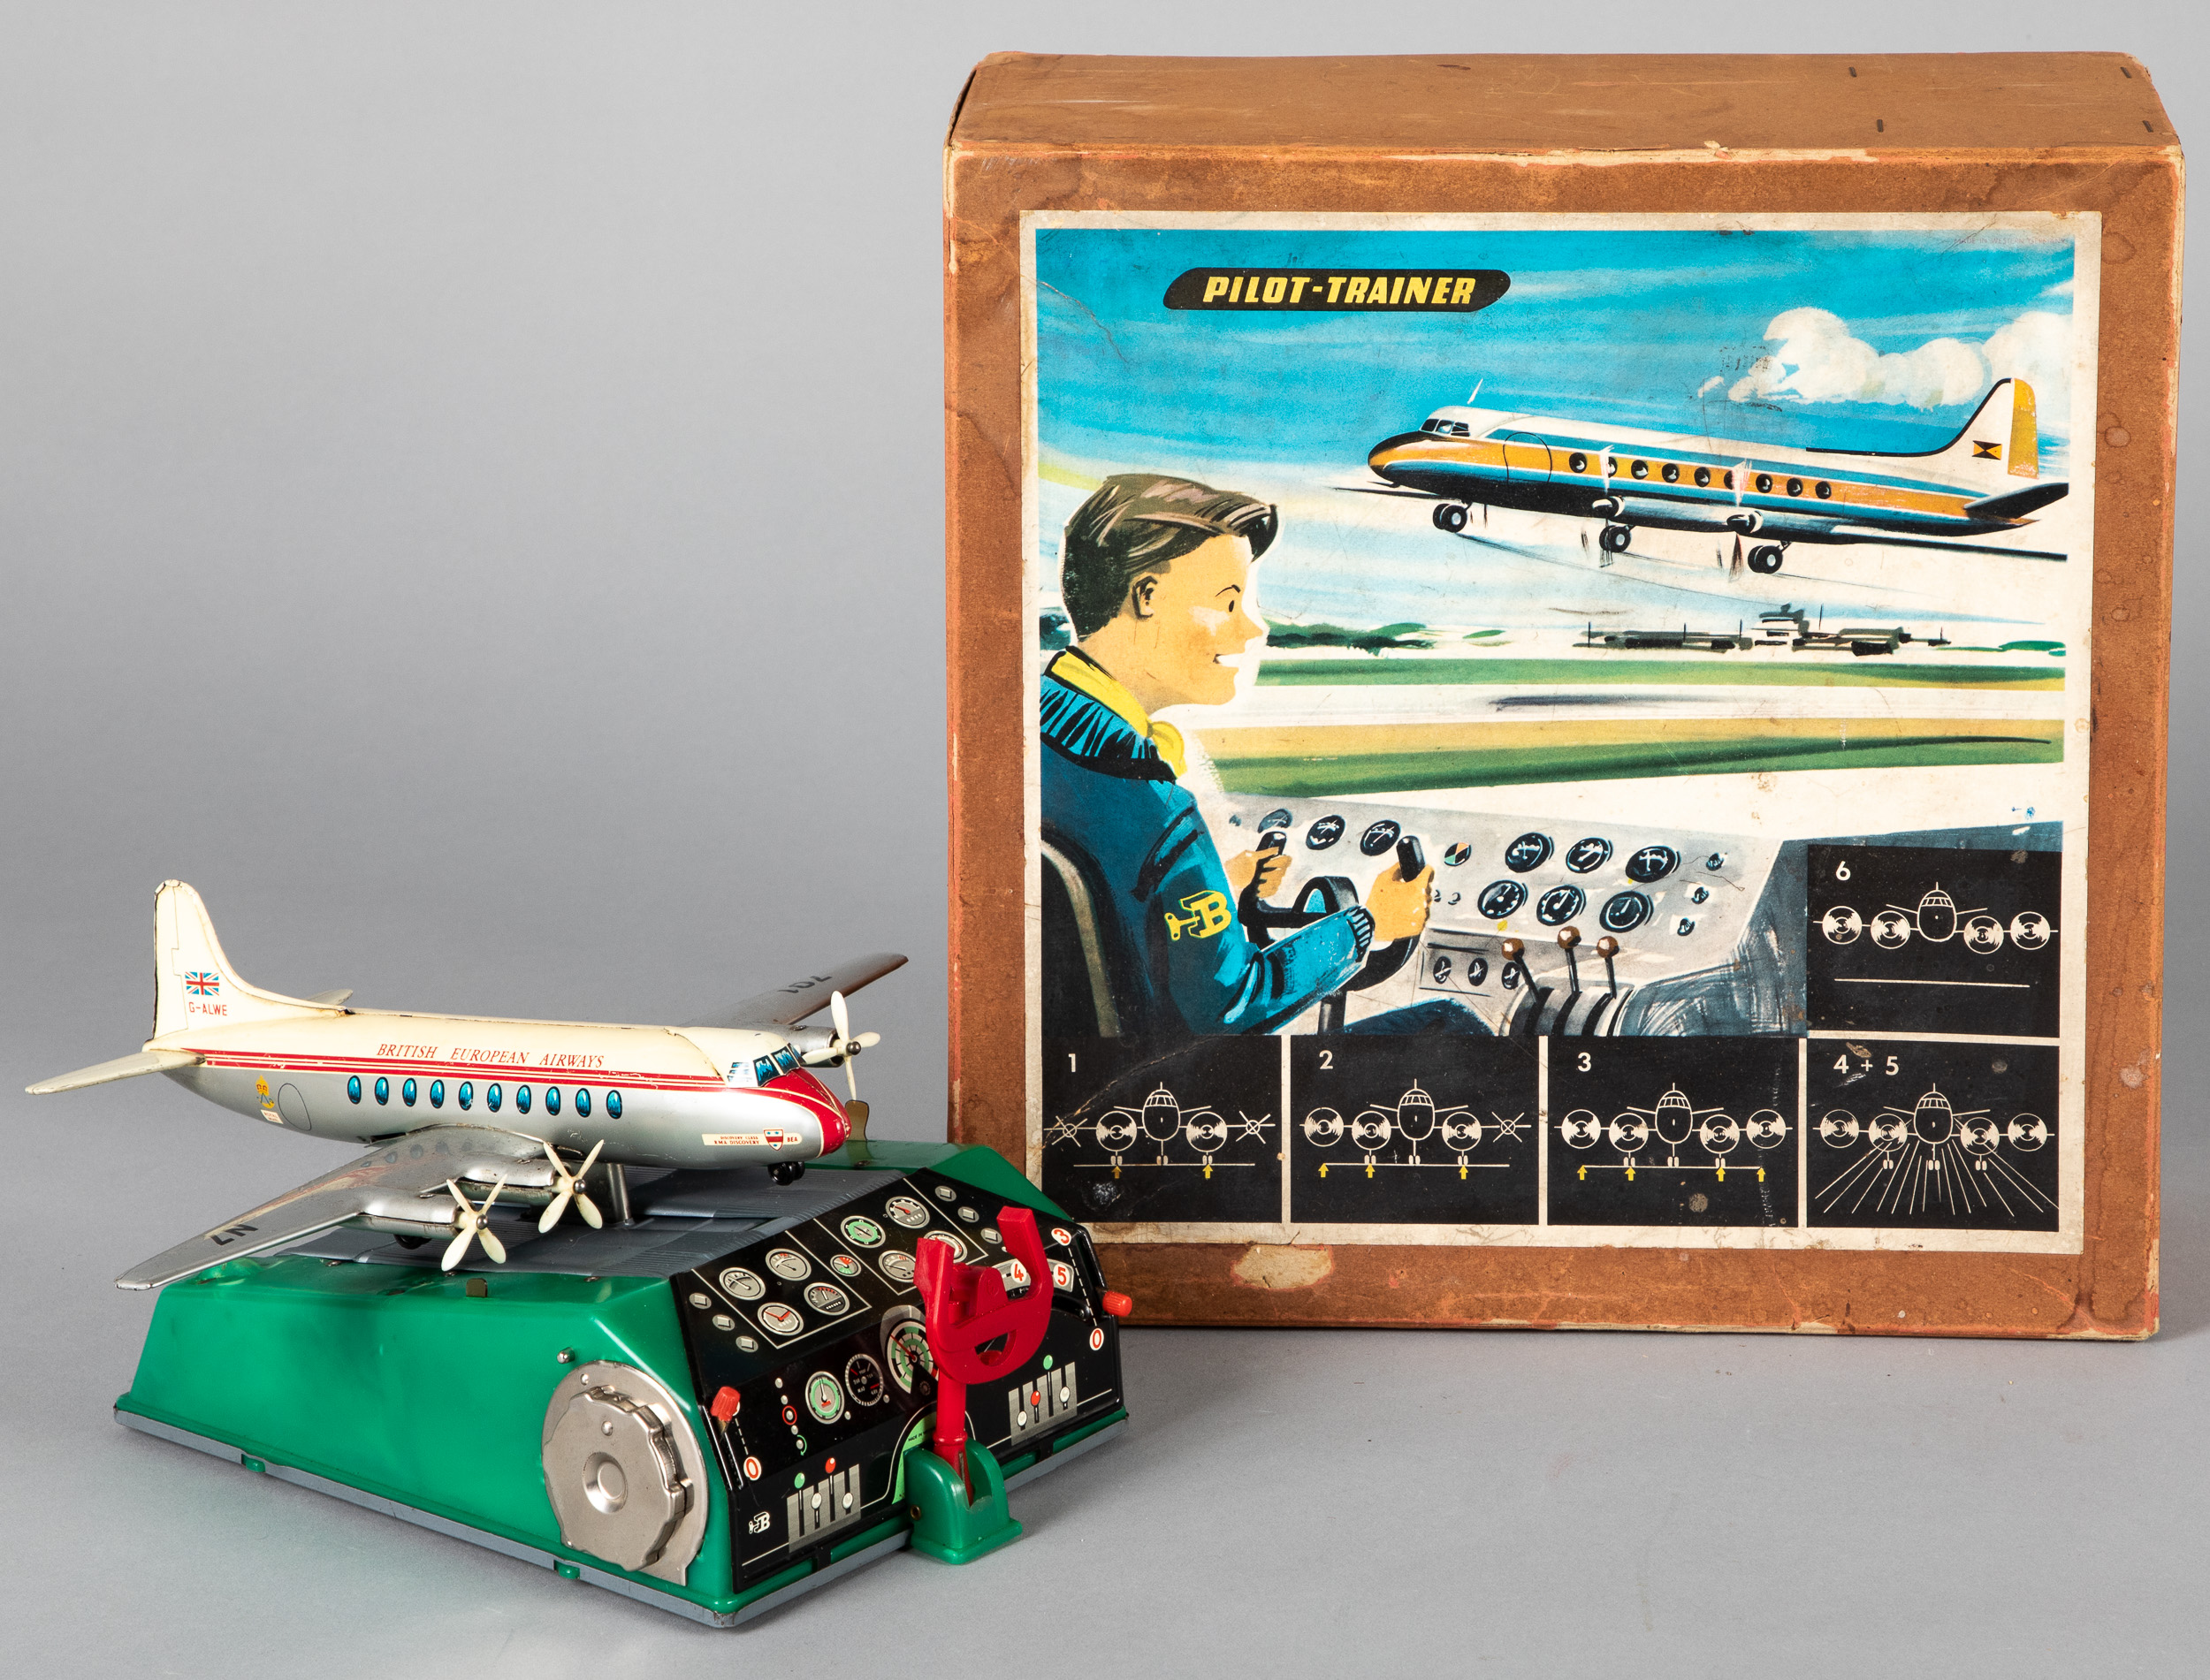 German tin lithograph battery operated Pilot Trainer